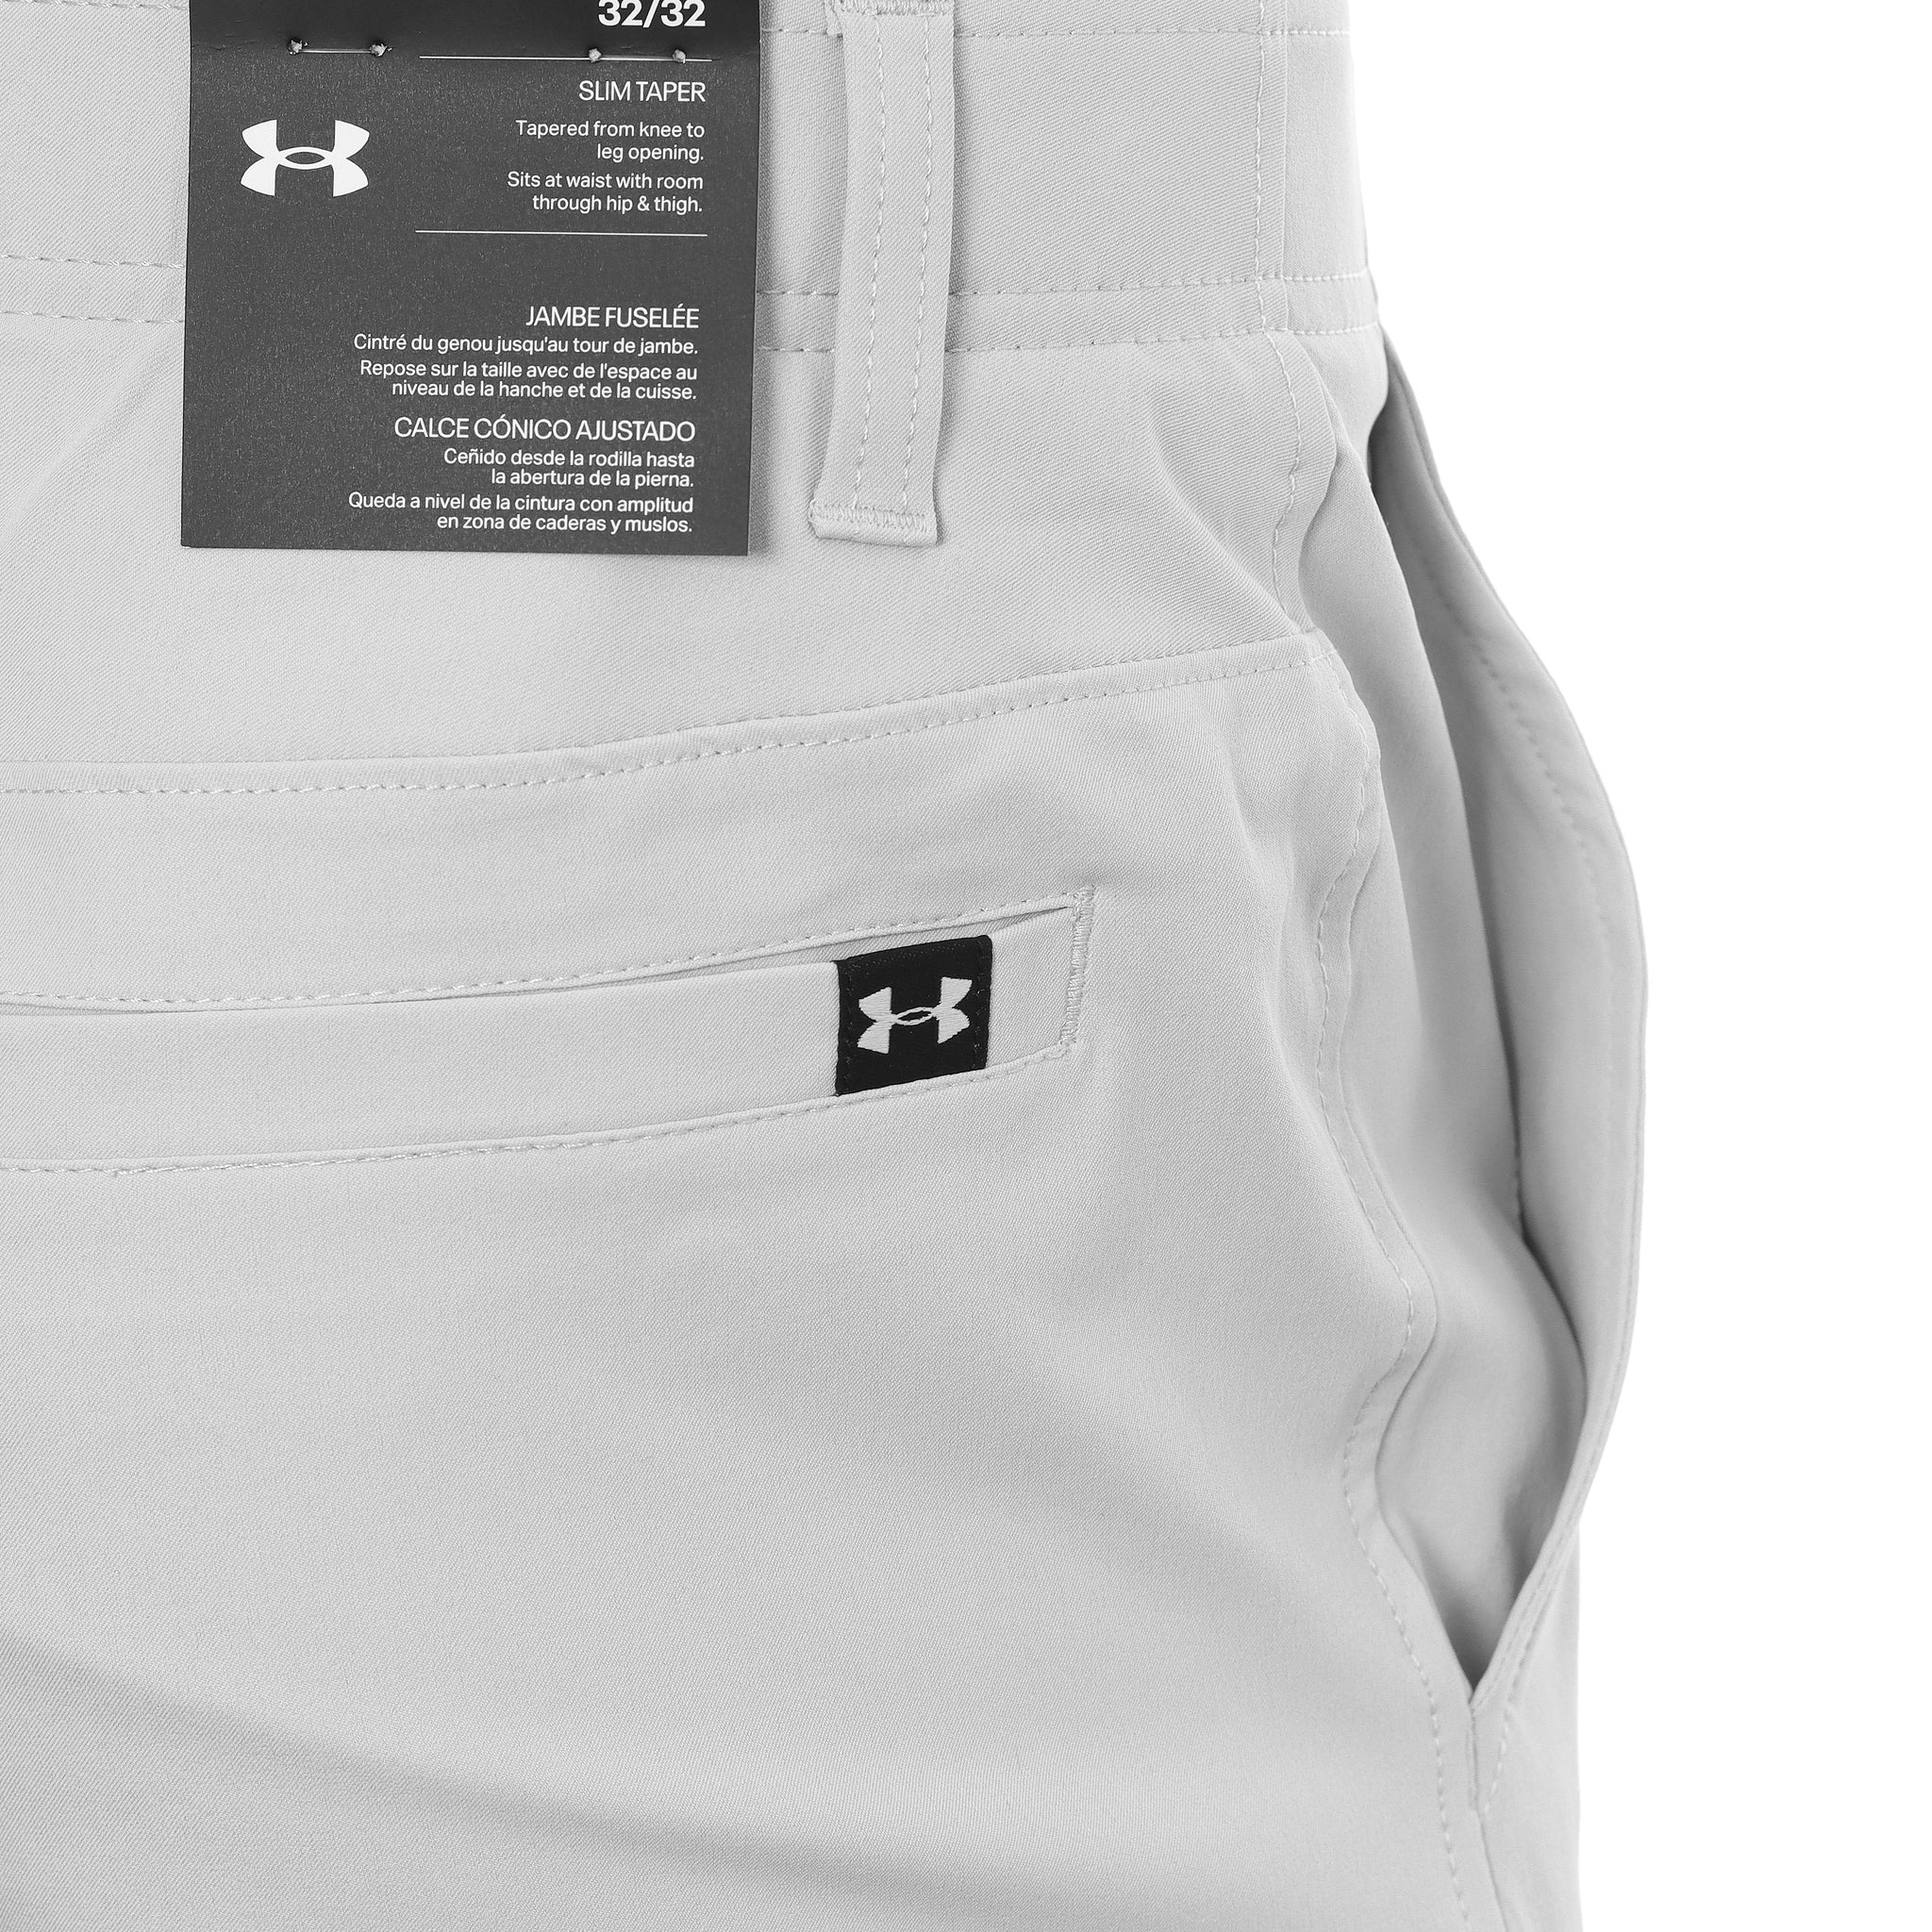 under-armour-golf-ua-drive-slim-tapered-pants-1364410-halo-grey-014